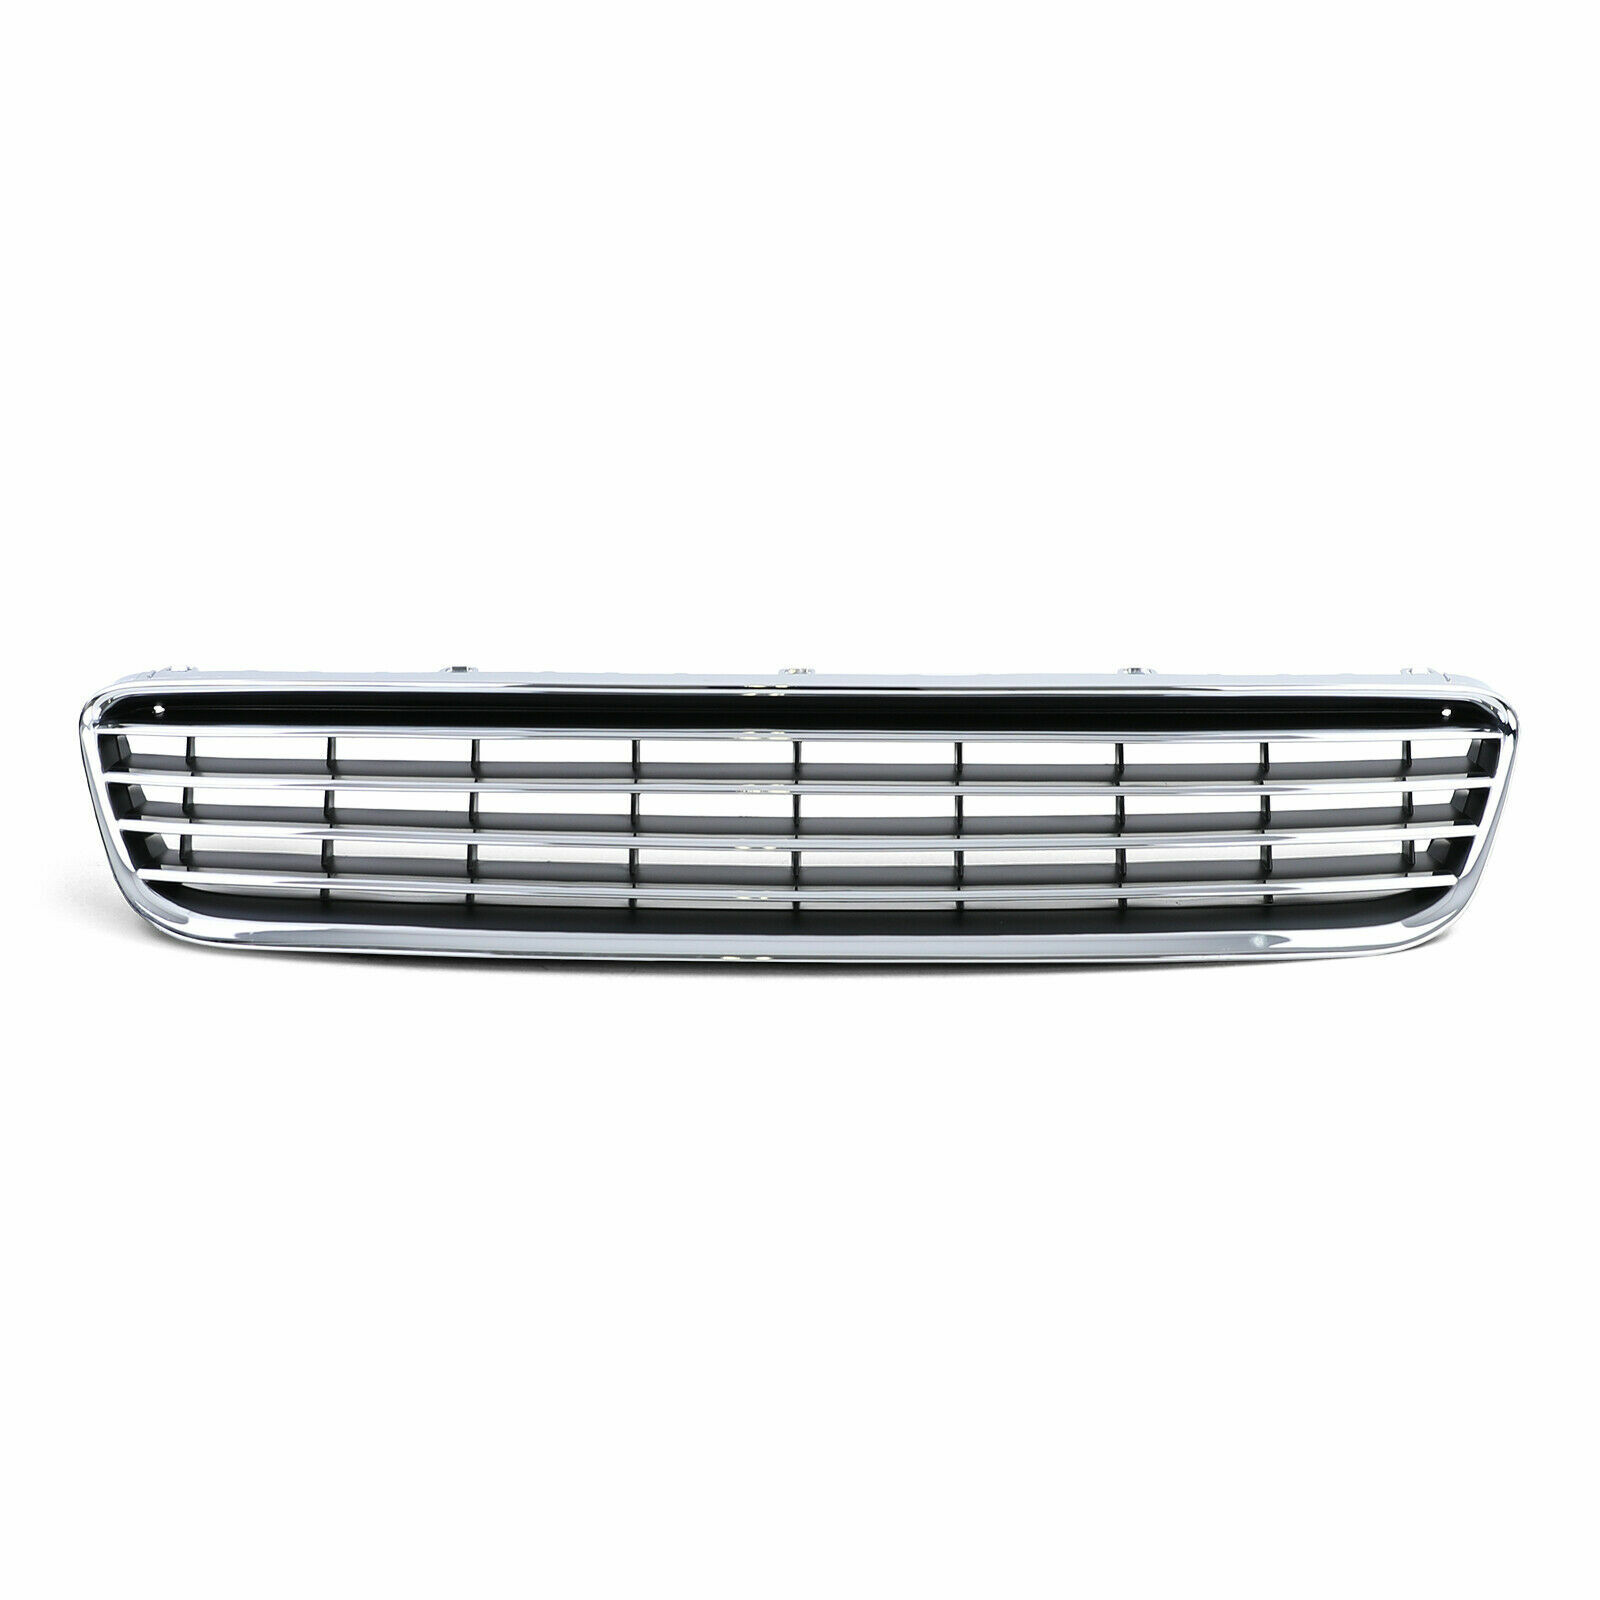 Sport Grill BLACK CHROME for AUDI A3 8L 00-03 – Monster Tuning